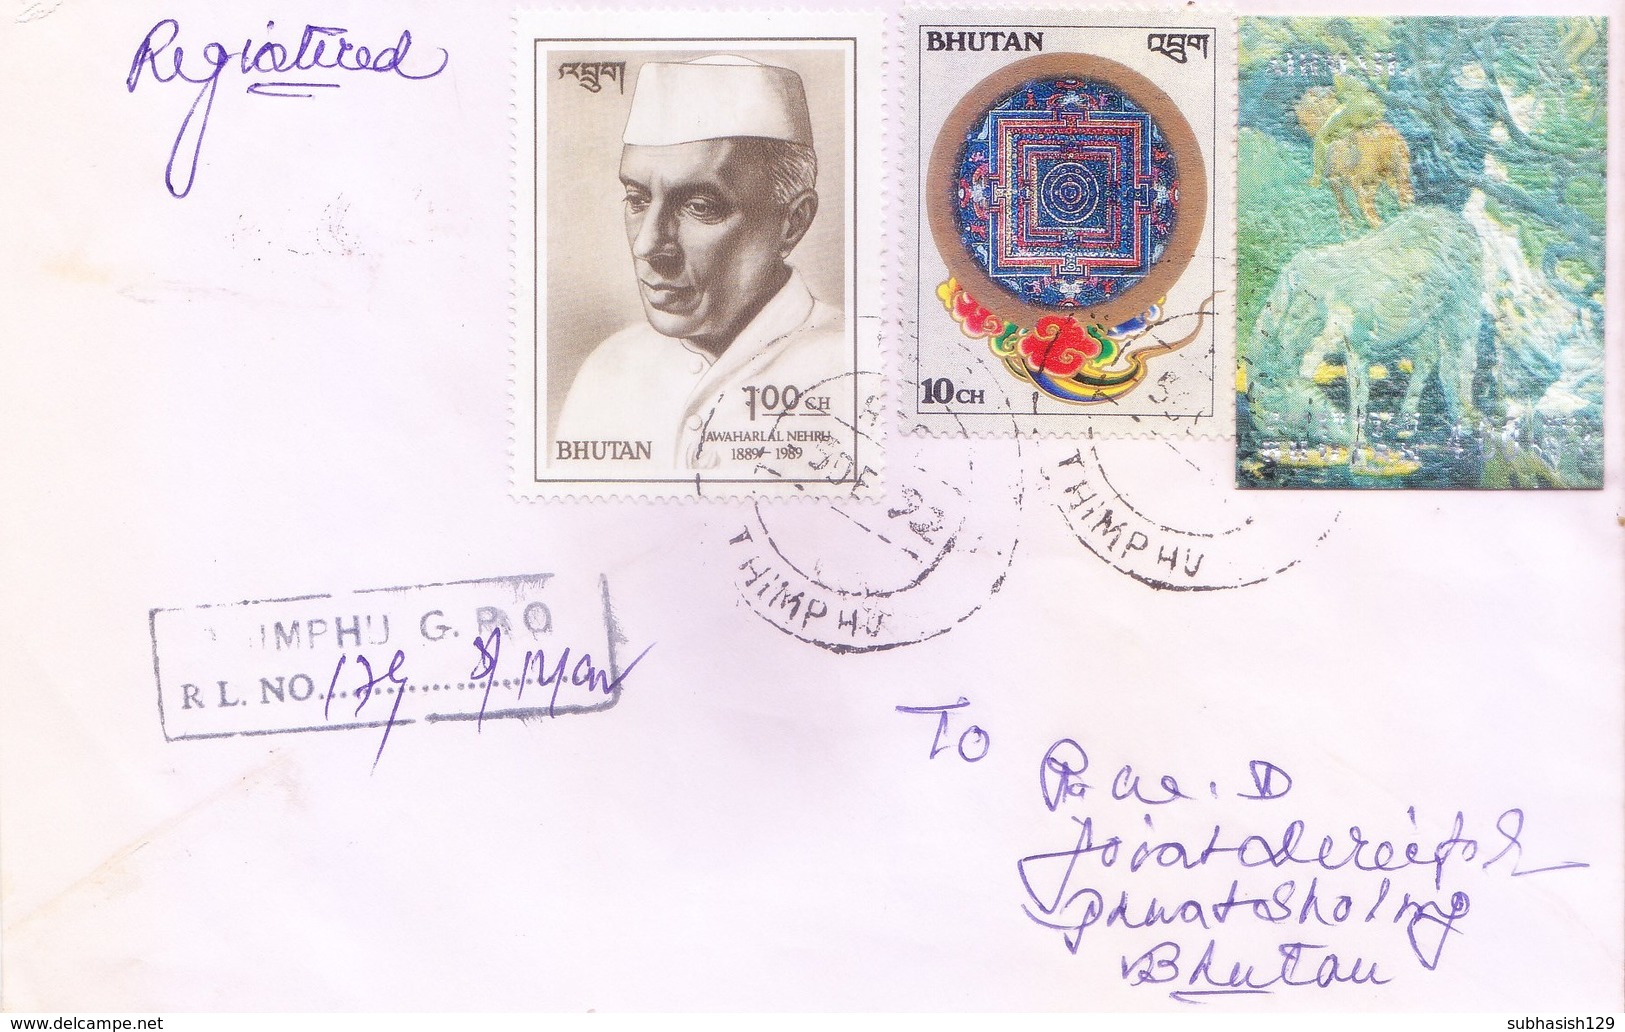 BHUTAN : REGISTERED COMMERCIAL COVER : POSTED FROM THIMPHU : USE OF 3D STAMP, PAINTING, ADDITIONAL STAMPS - Bhutan